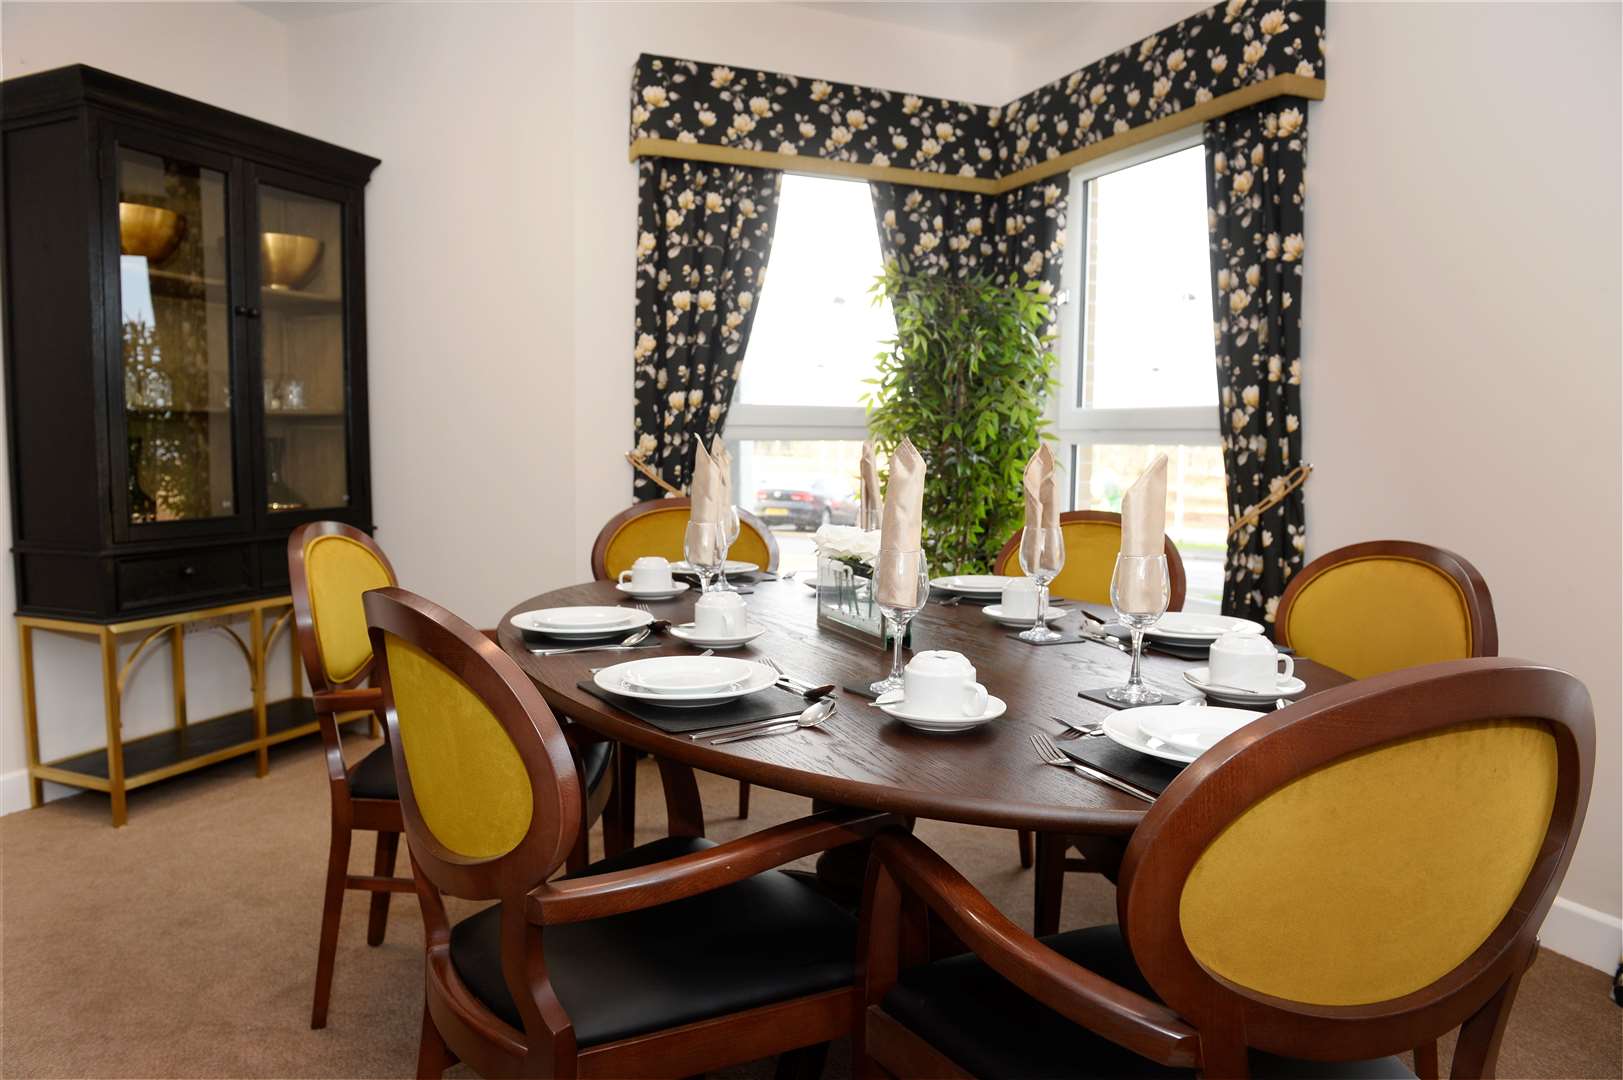 Private dinning room for functions. Picture: Gary Anthony